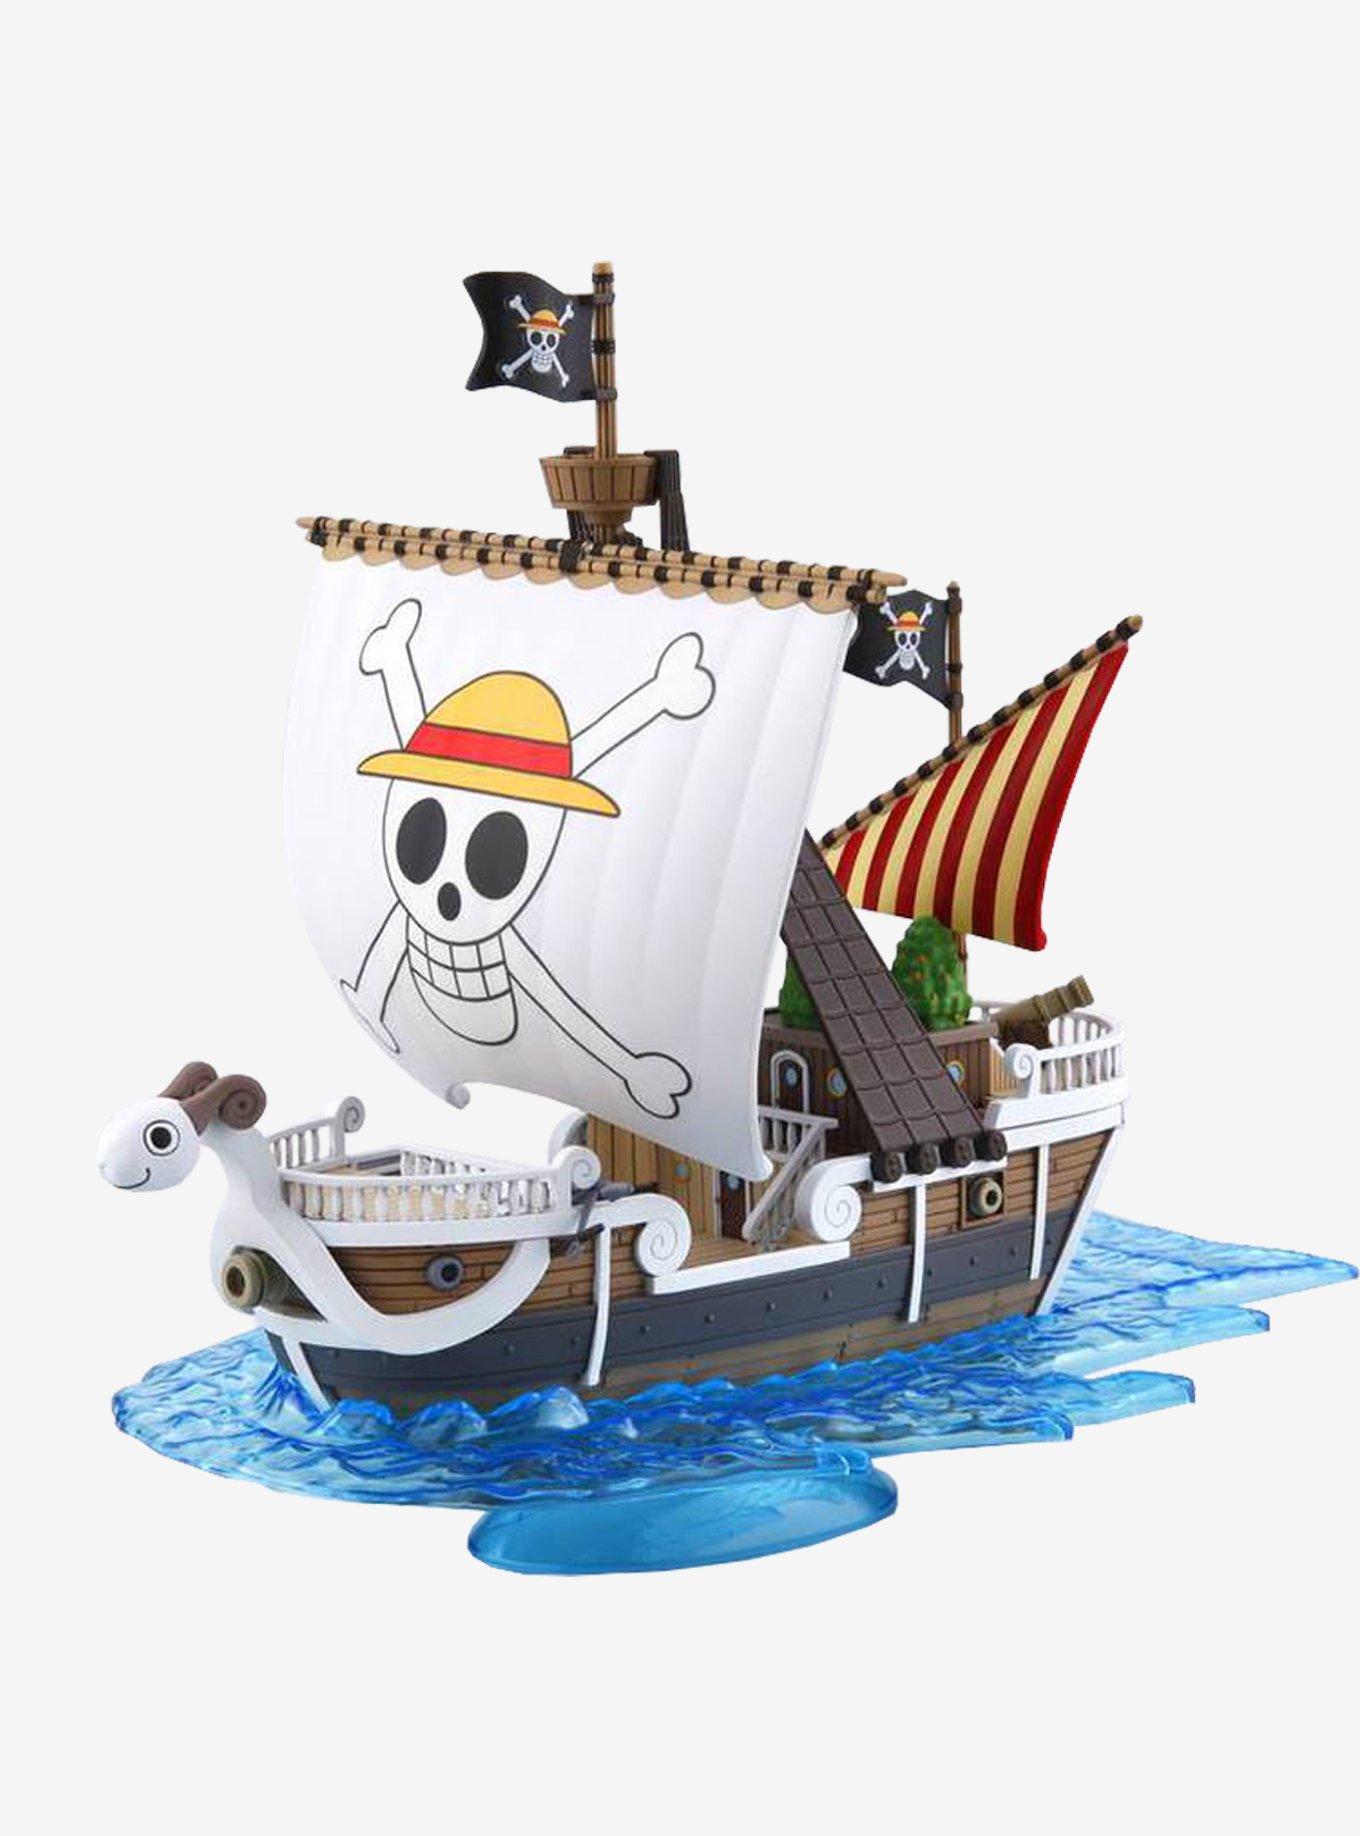 Statue: Going Merry One Piece (Netflix) Statue by Infinity Studio